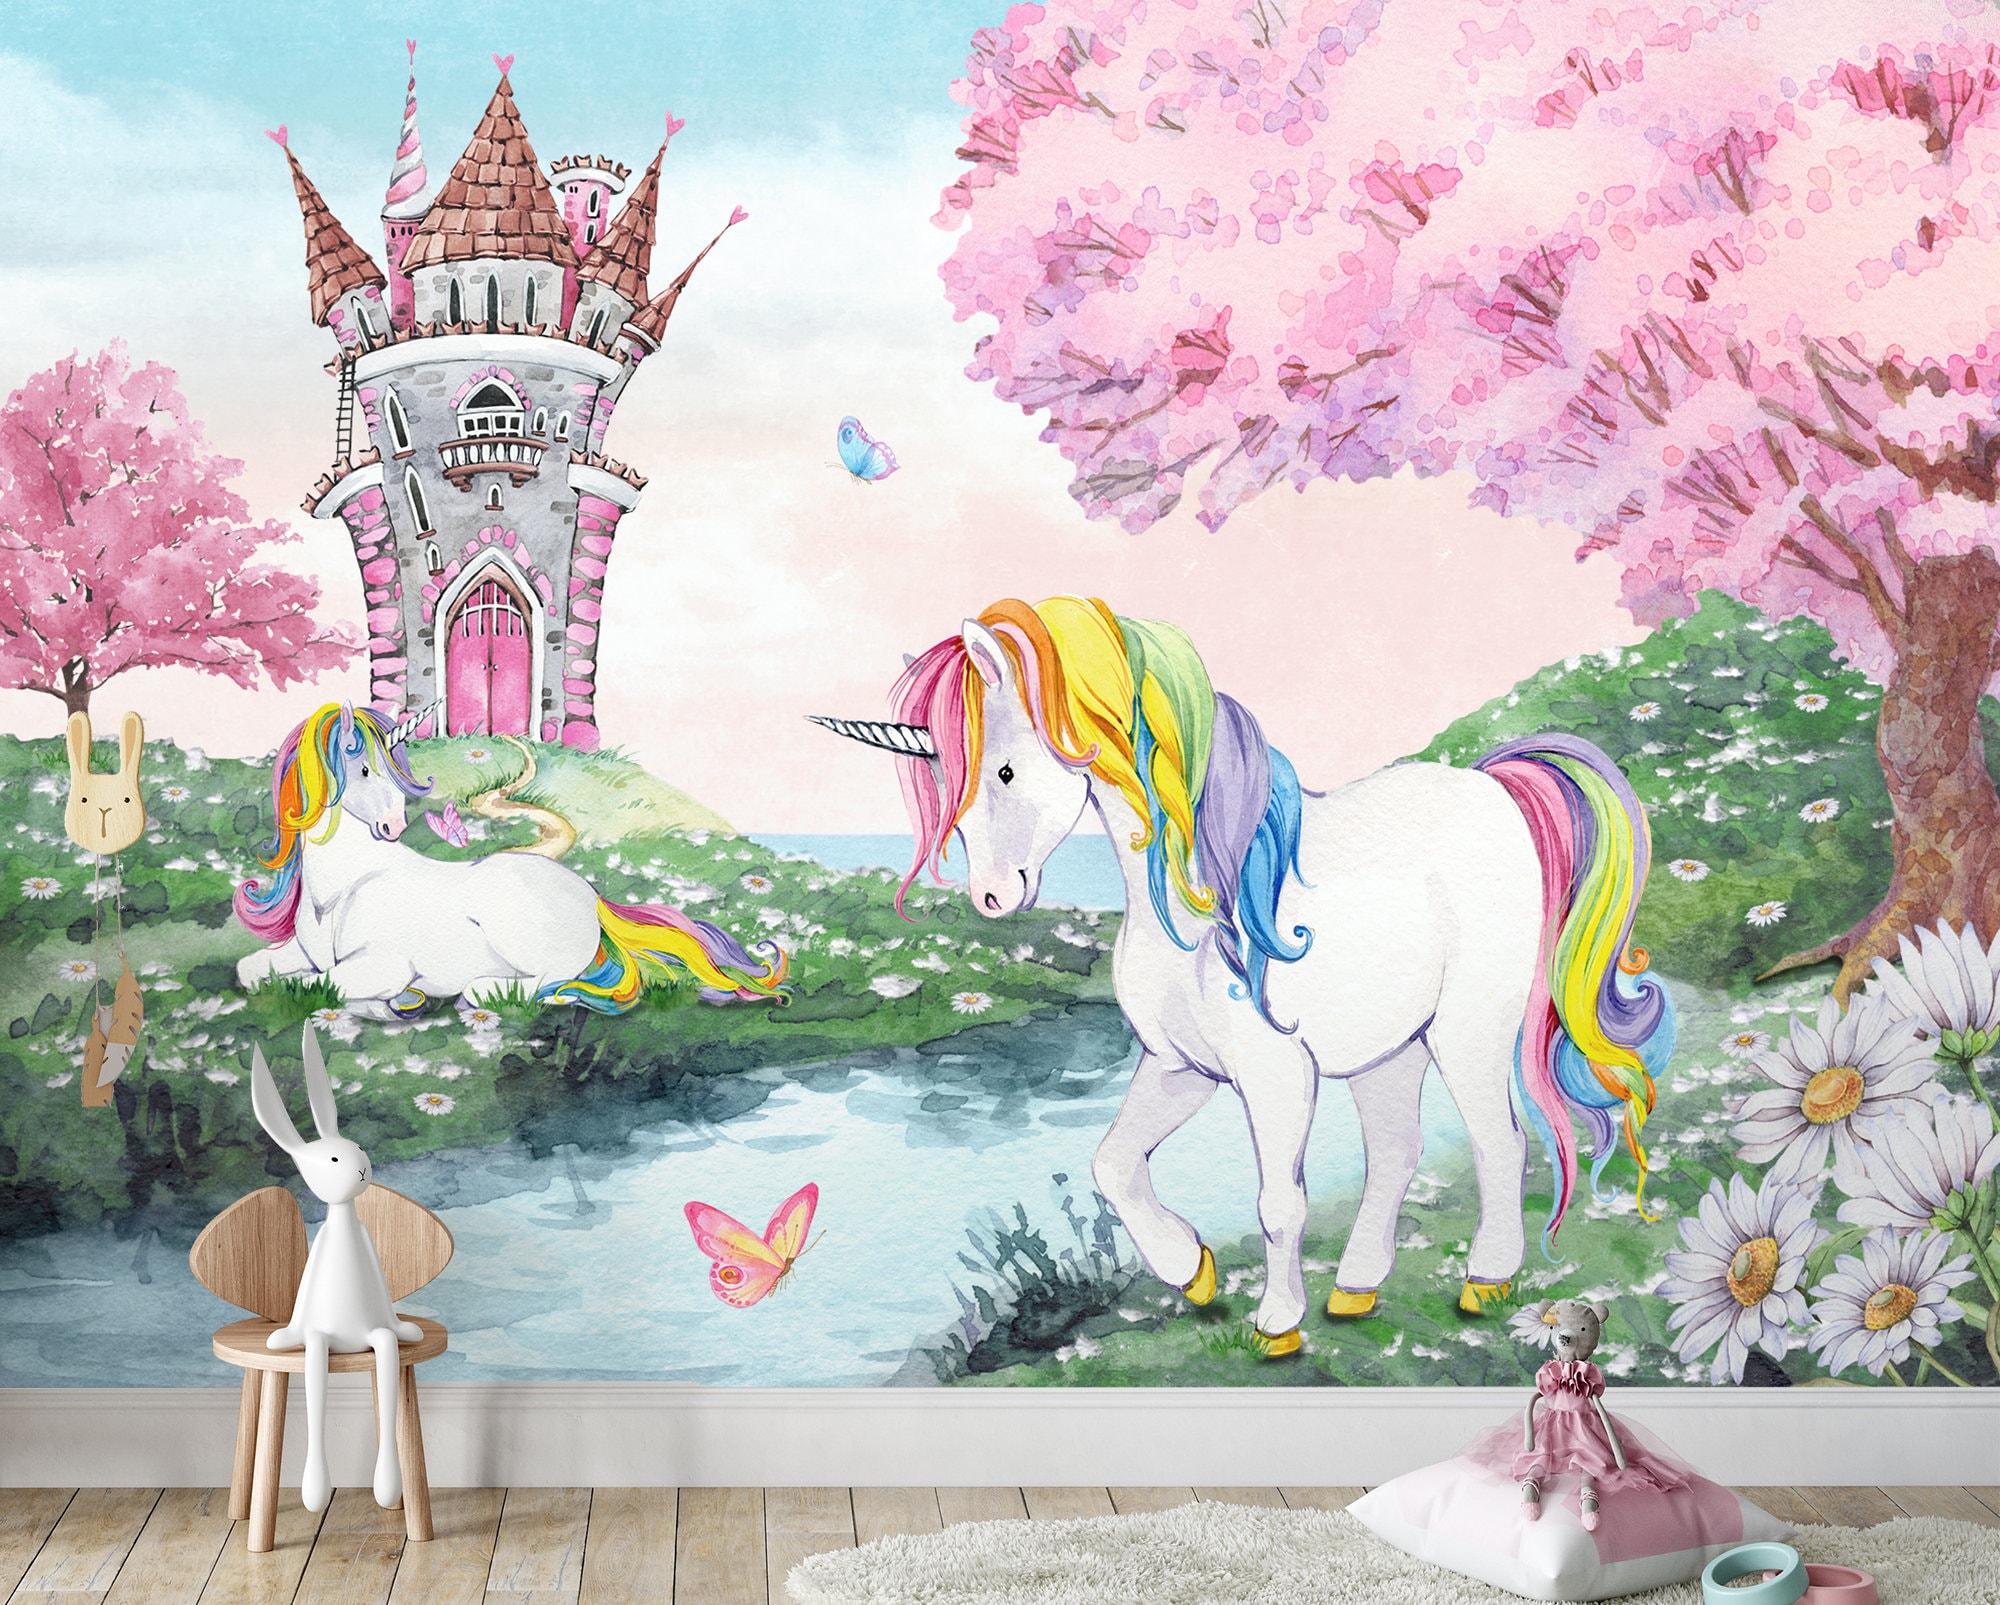 4Sheets Unicorn Wall Decor, Large Size Removable Unicorn Wall Decals S